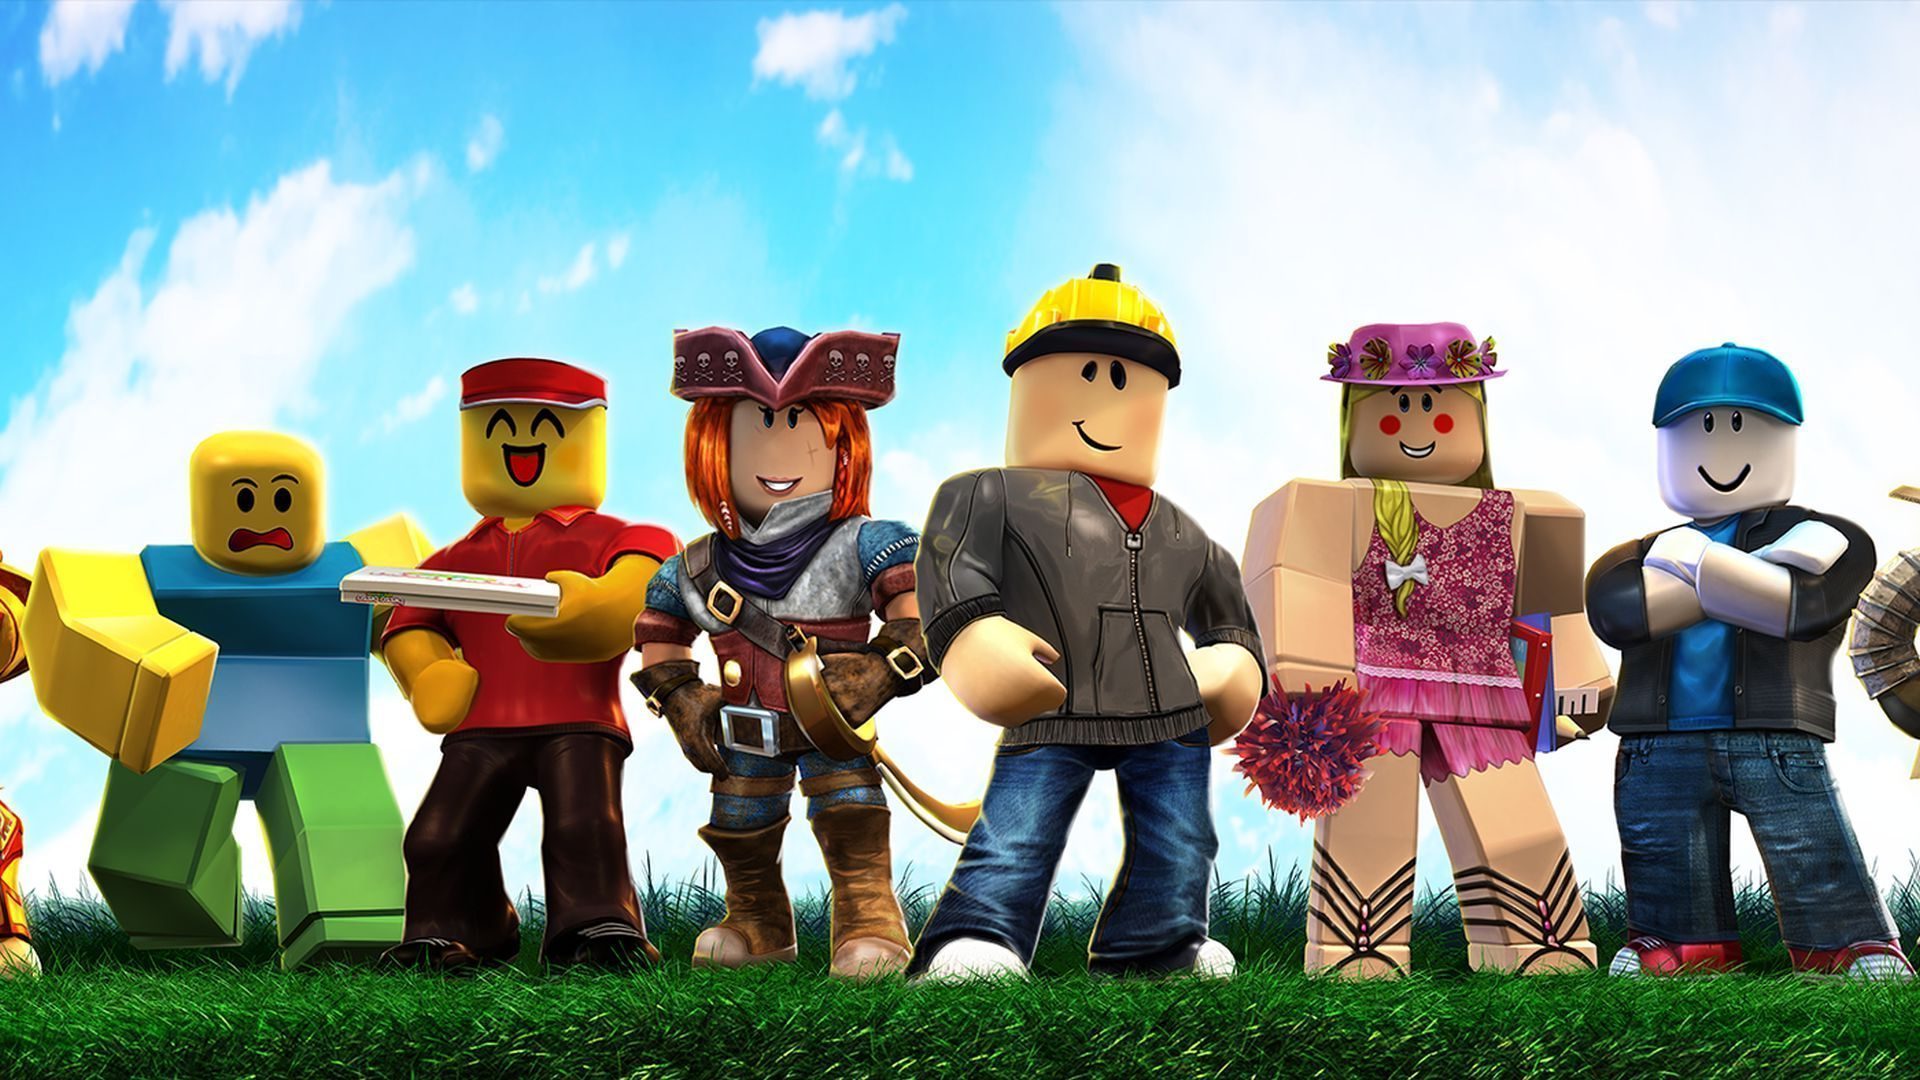 What Are the Best Outfits for Your Roblox Avatars  TechBullion